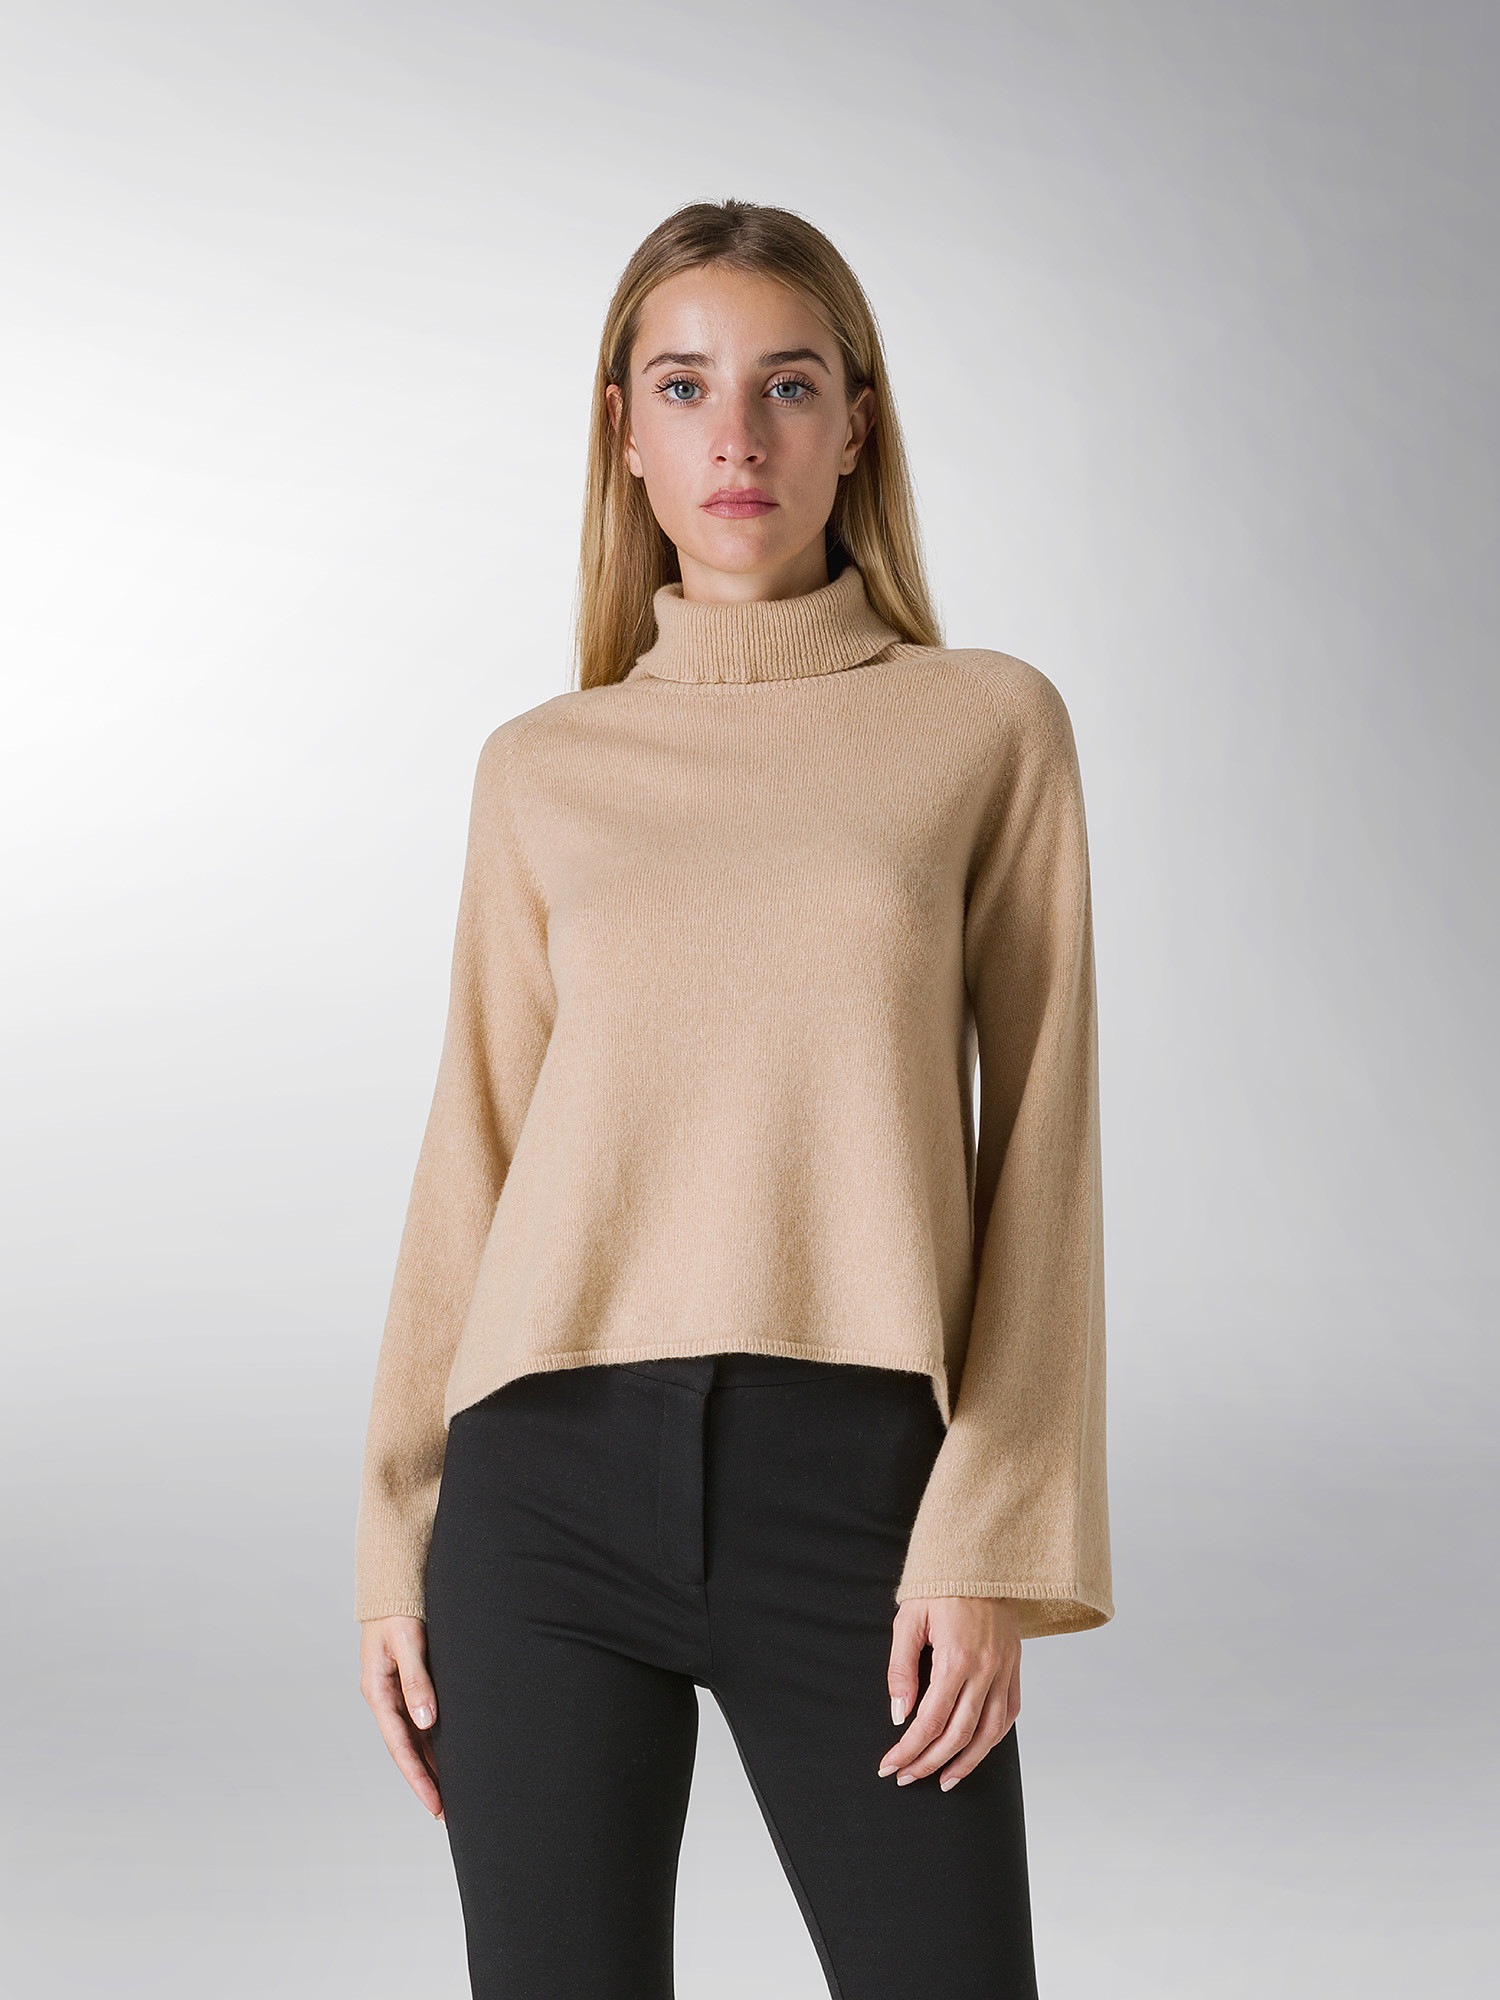 Coin Cashmere - Turtleneck in pure premium cashmere, Grey, large image number 1